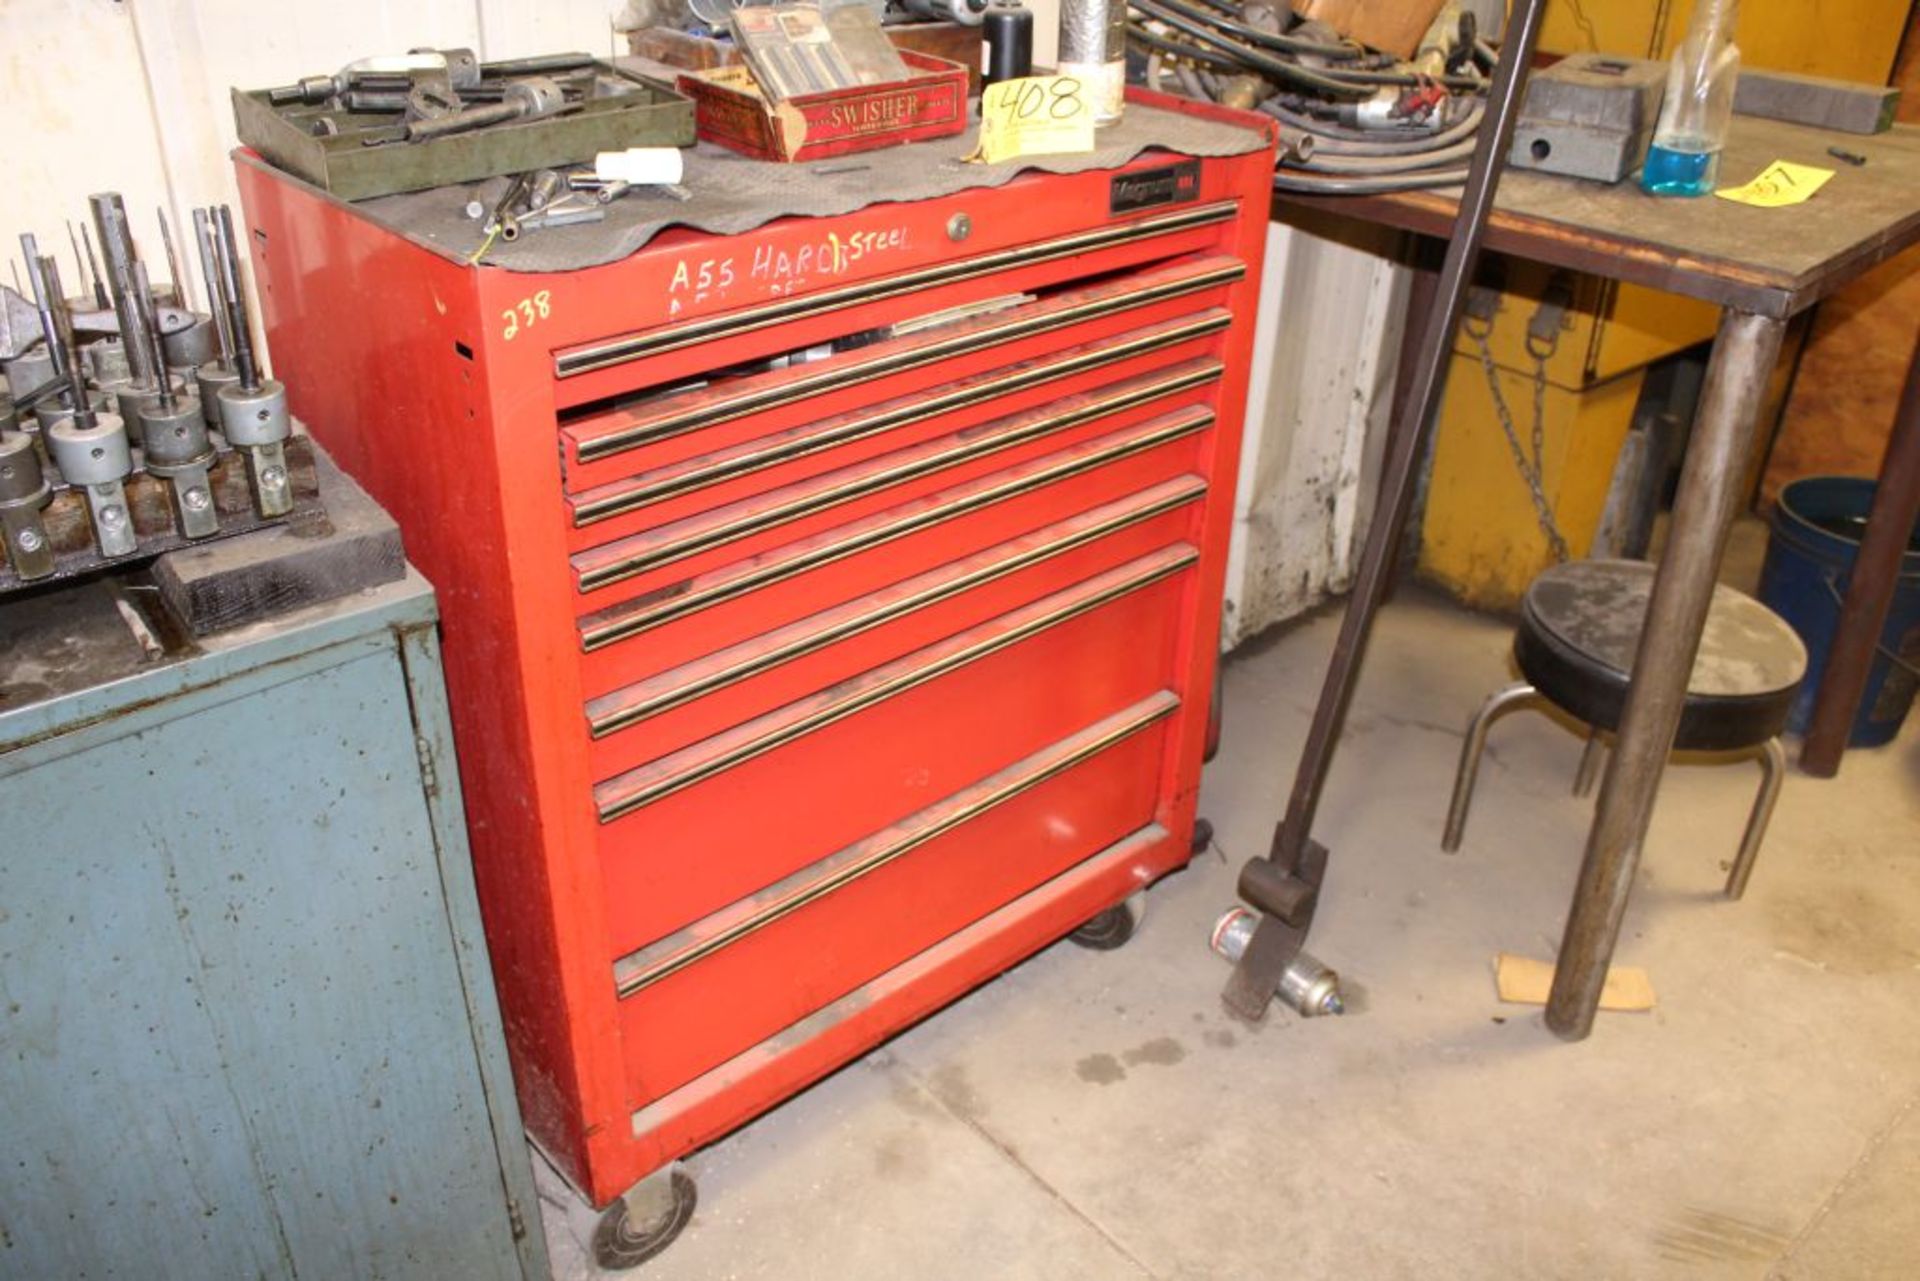 W.I. Magnum tool chest, 7 drawer. - Image 3 of 3